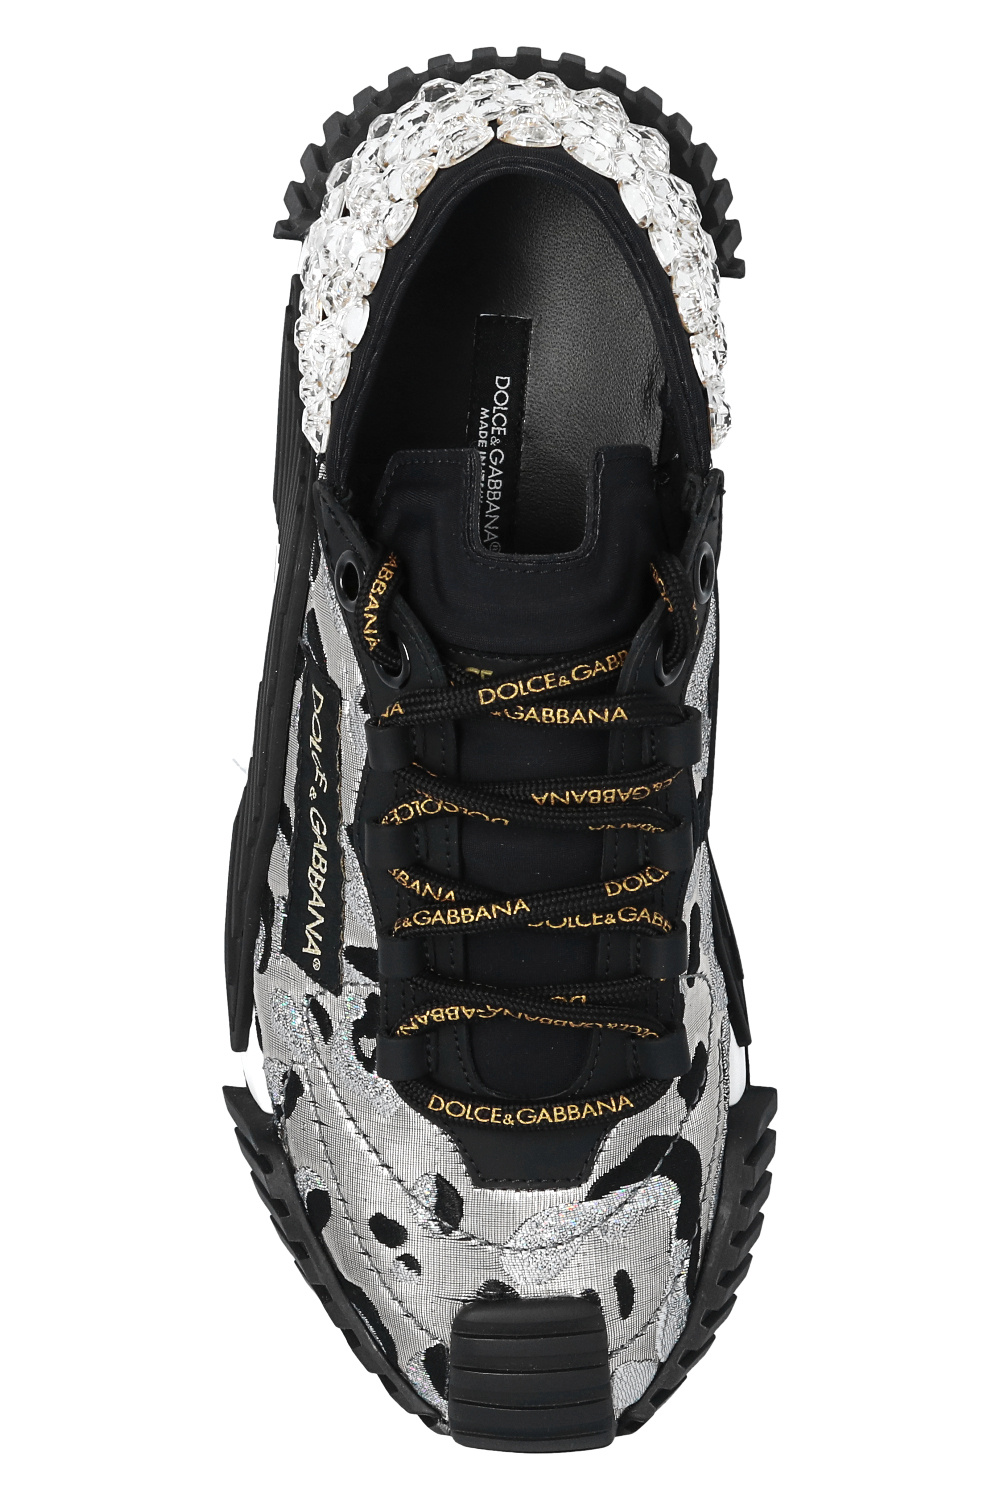 dolce & gabbana leather bag ‘NS1’ sneakers